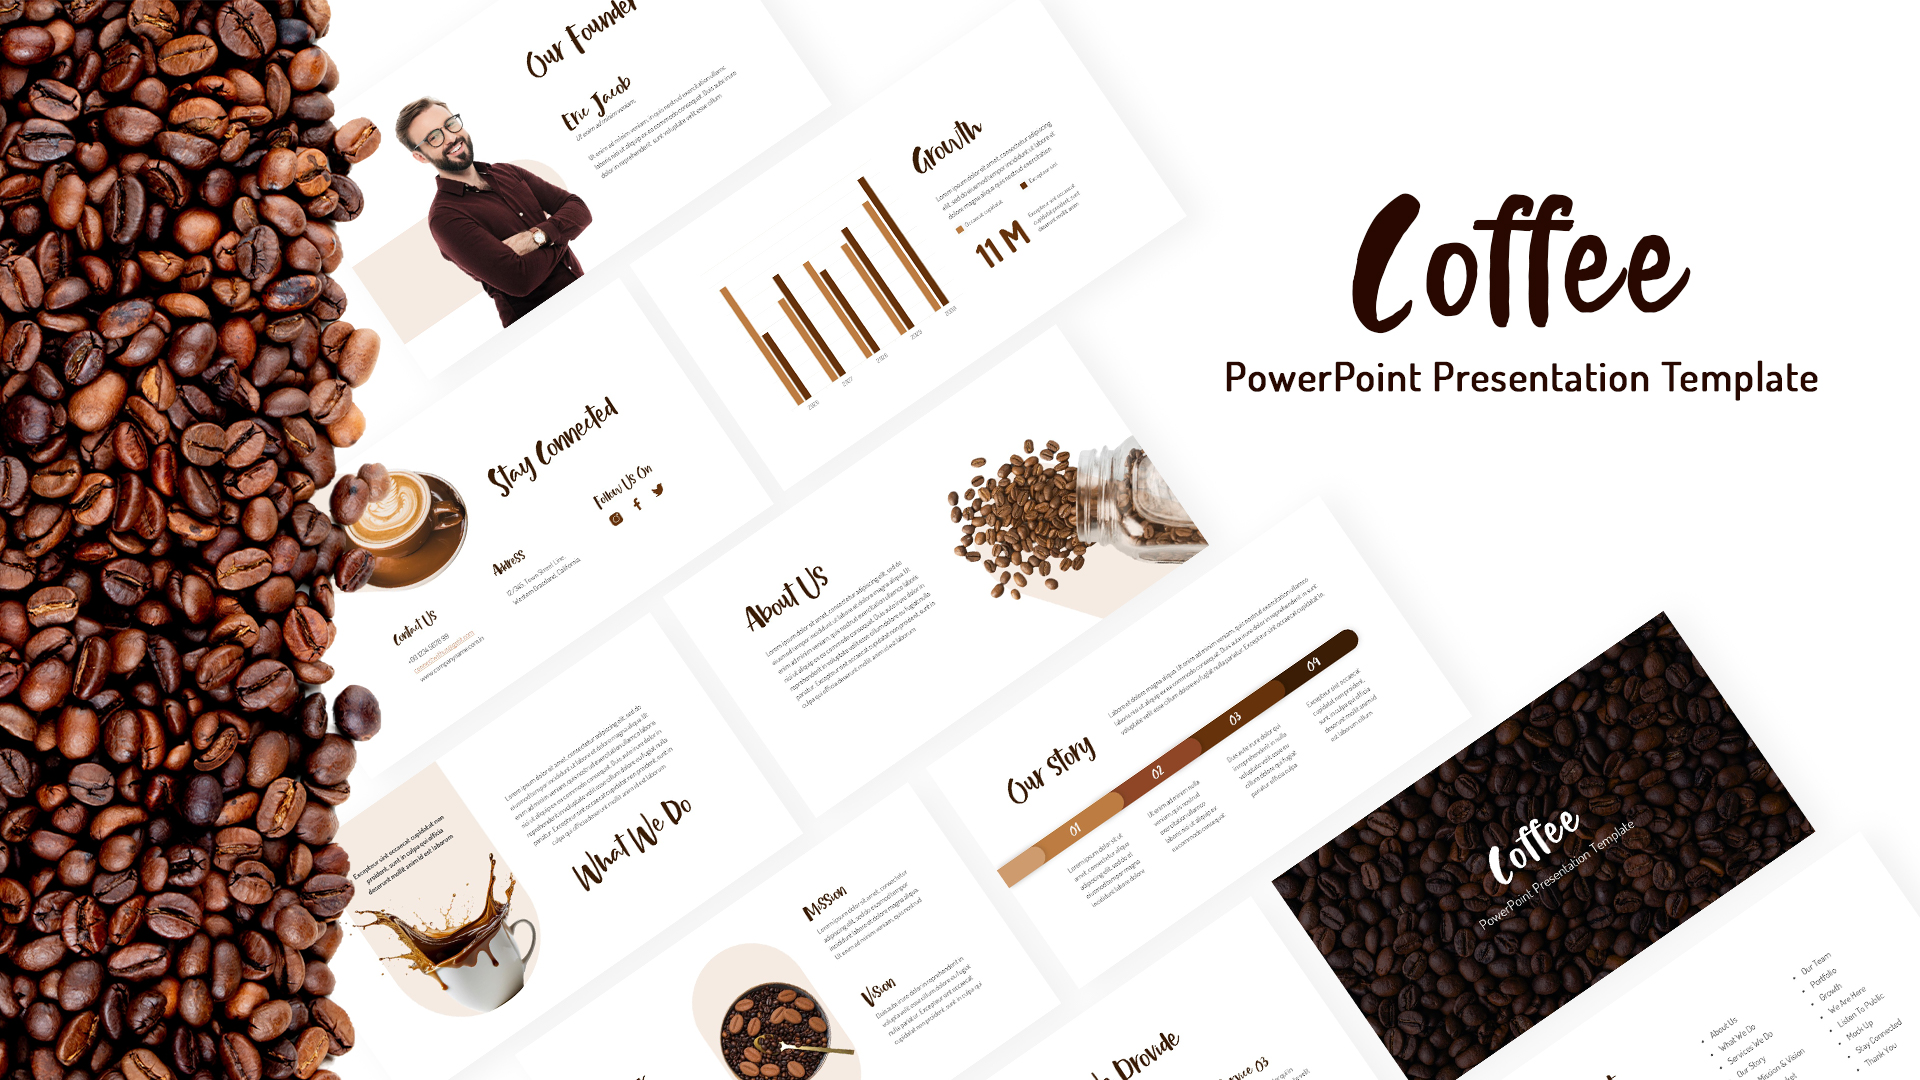 Free Coffee PowerPoint Template Deck Cover Image